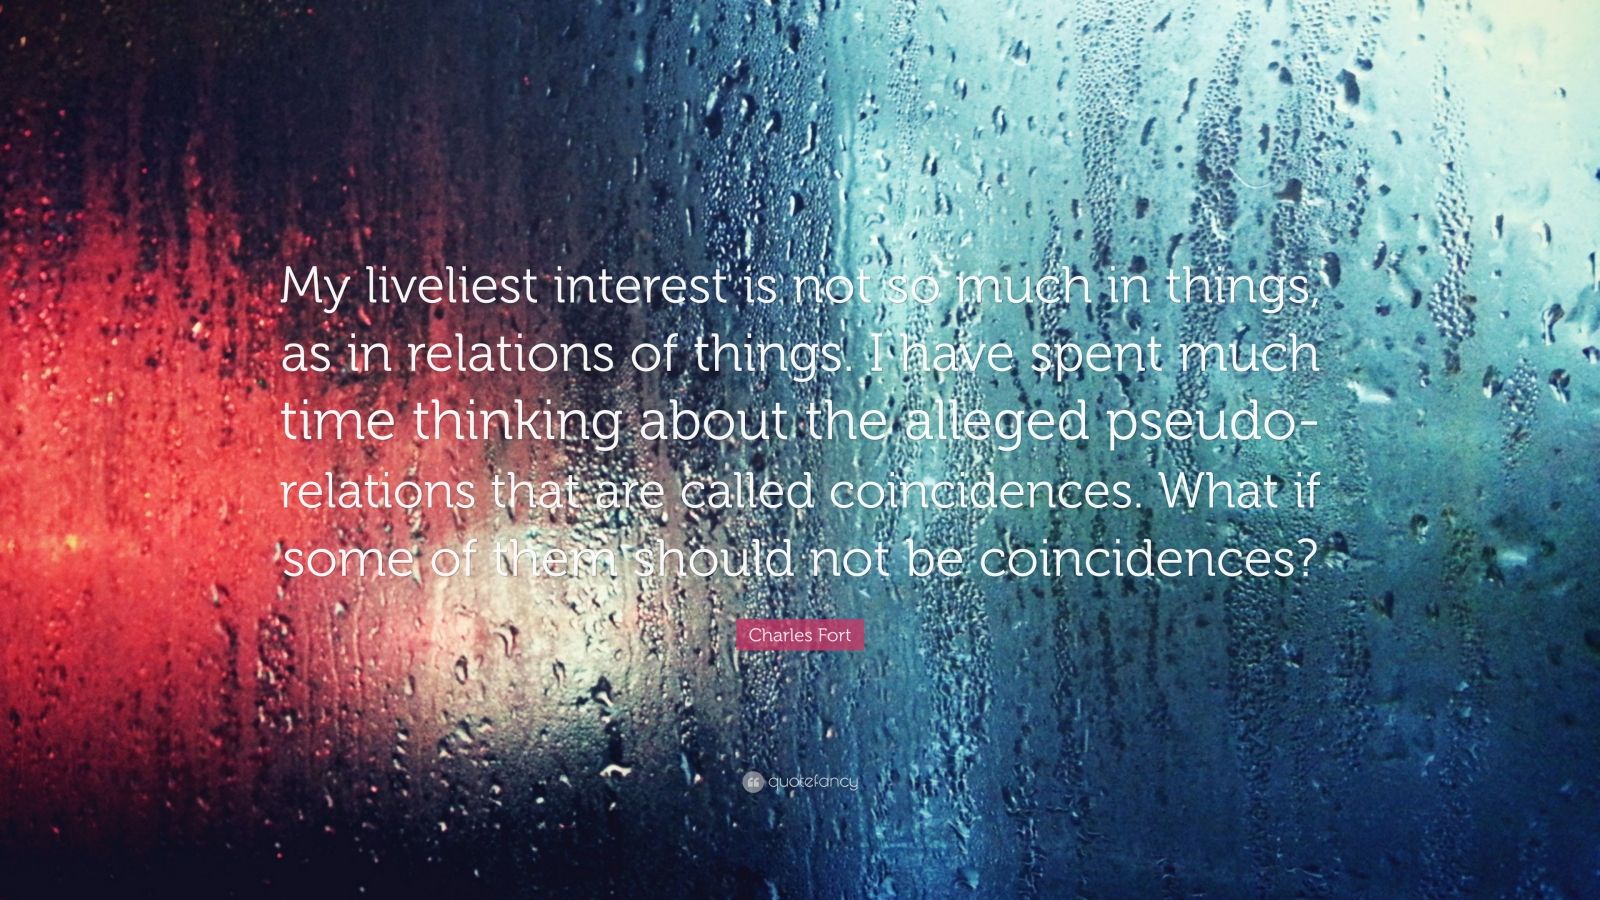 Charles Fort Quote: “My liveliest interest is not so much in things, as ...